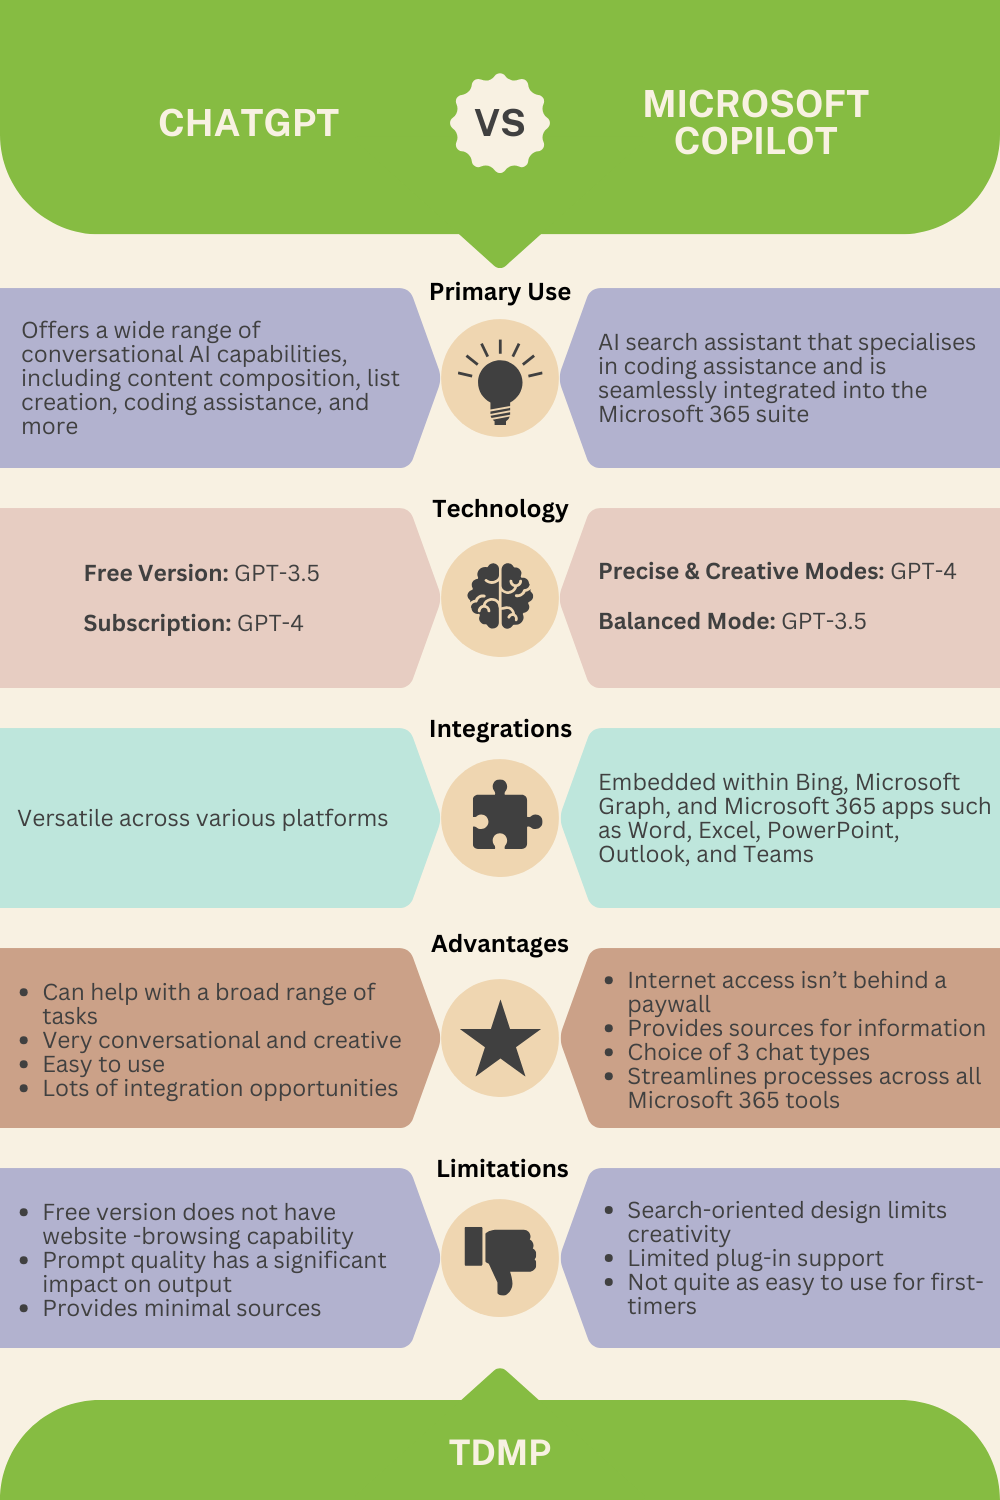 An infographic illustrating the differences between ChatGPT and Microsoft Copilot